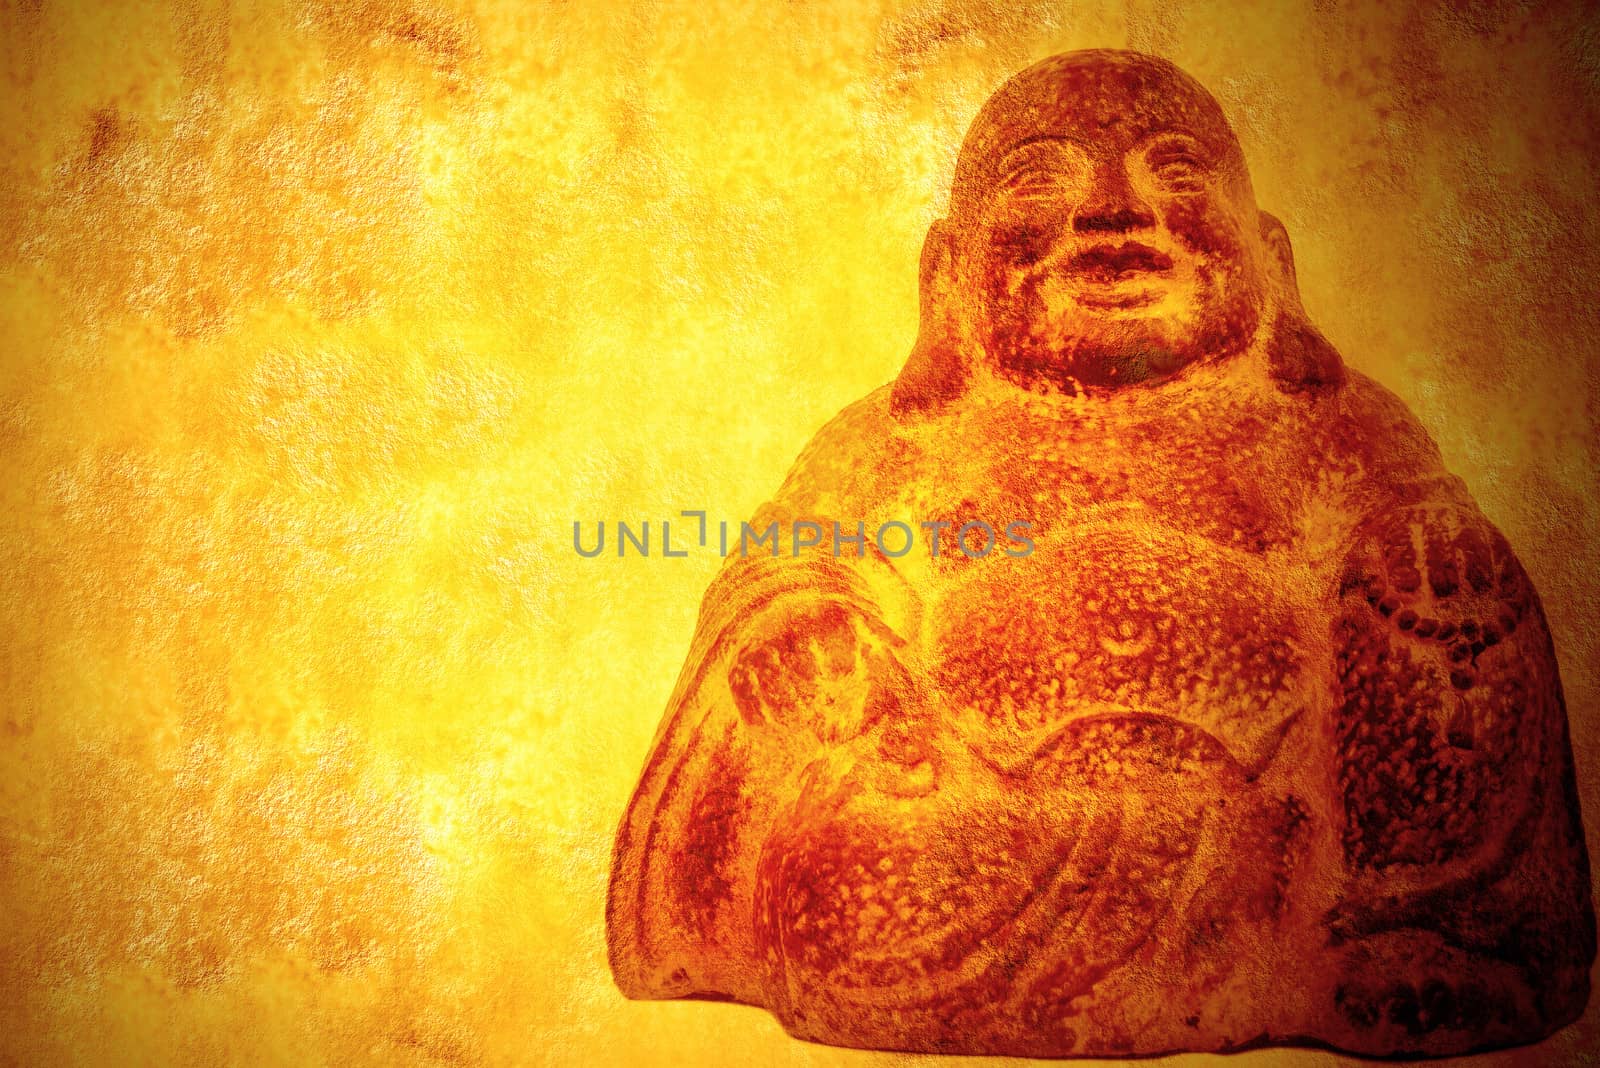 smiling buddha sitting parchment background  by Carche